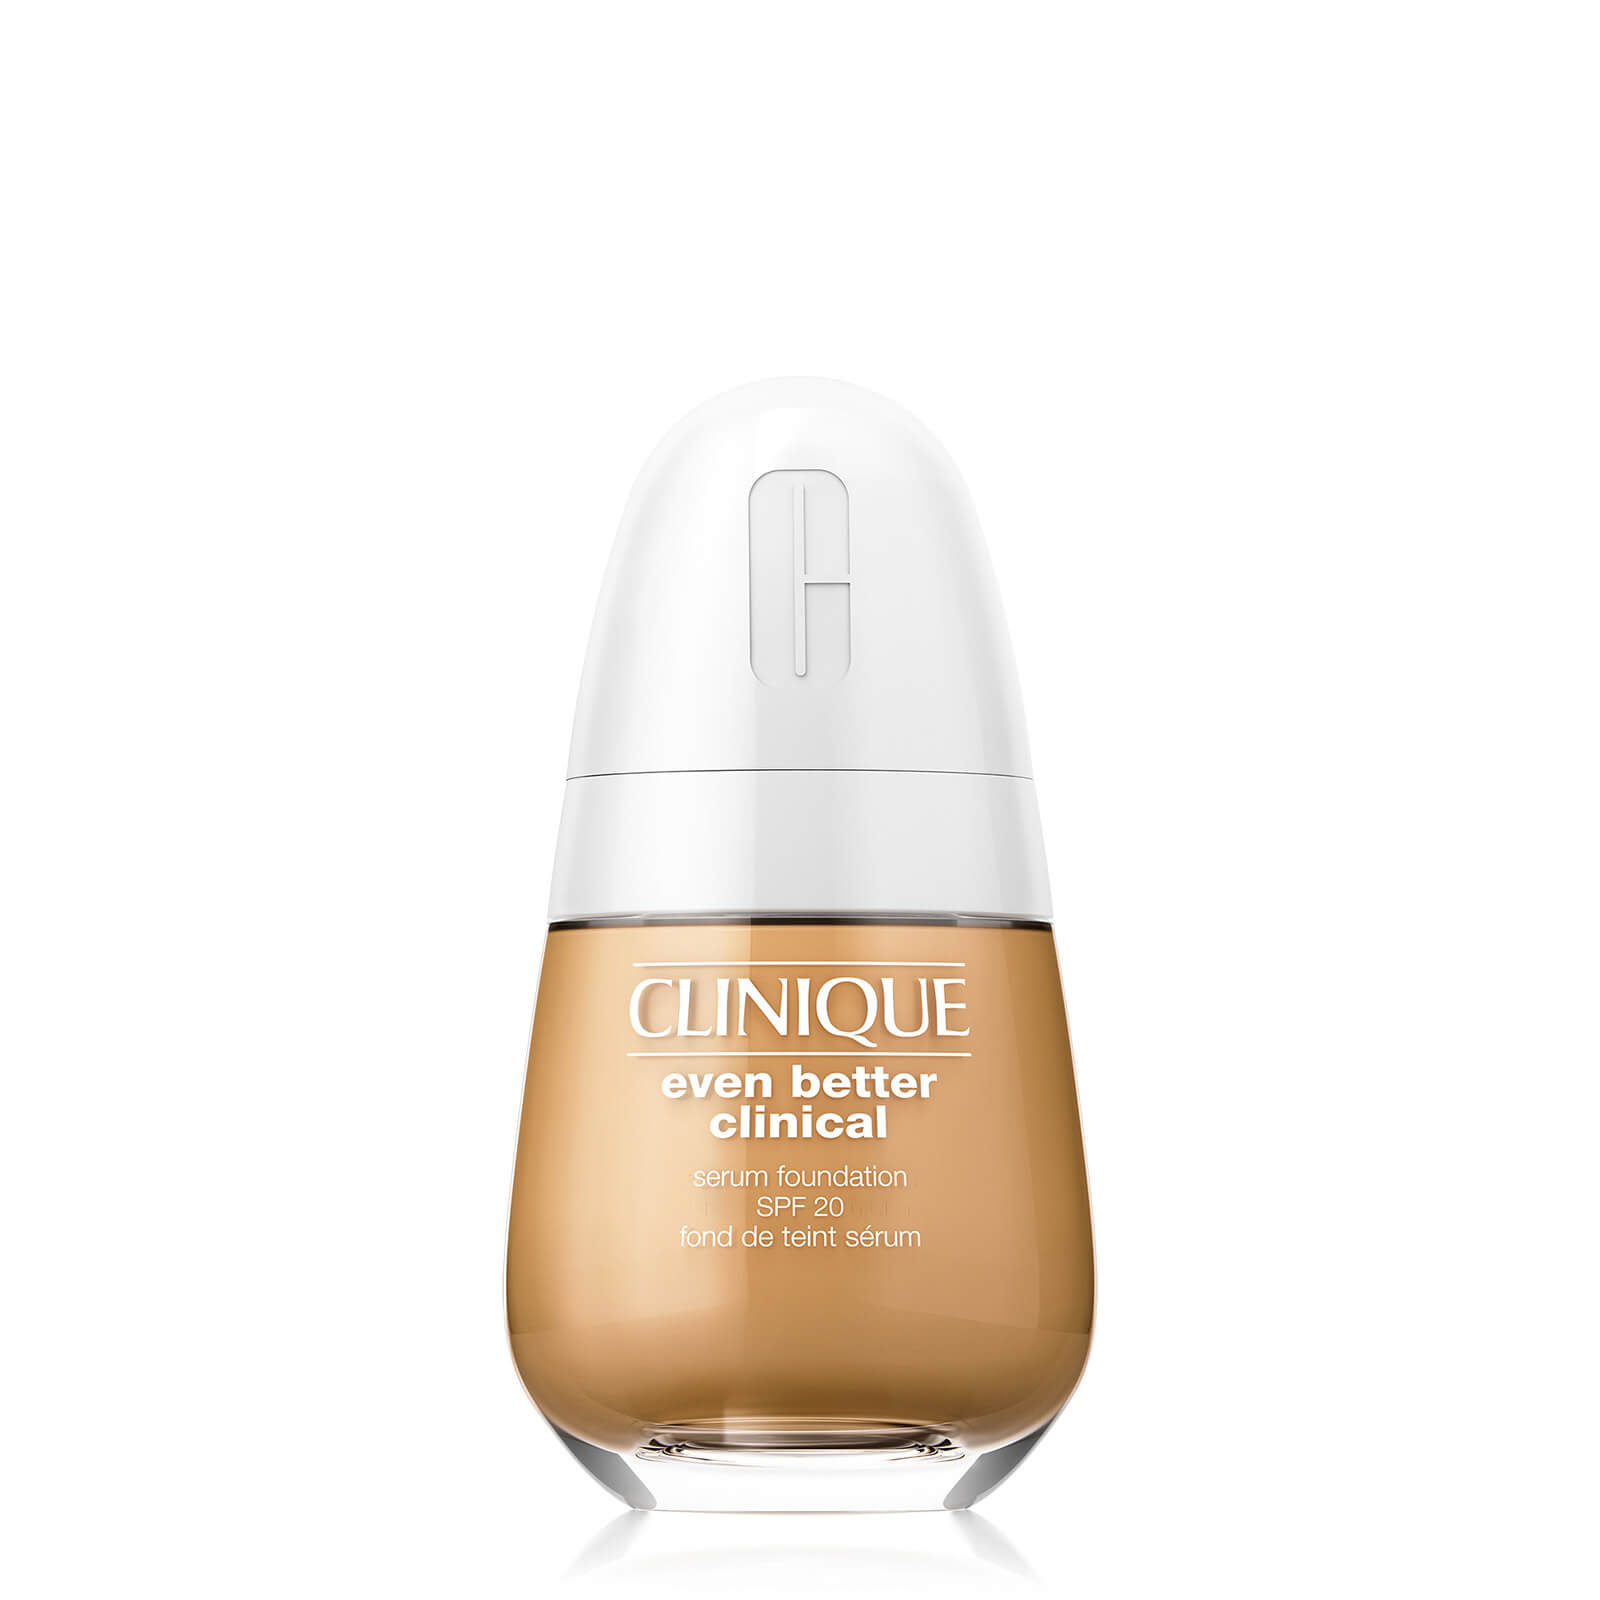 Clinique Even Better Clinical Serum Foundation SPF20 30ml (Various Shades) - Tawnied Beige